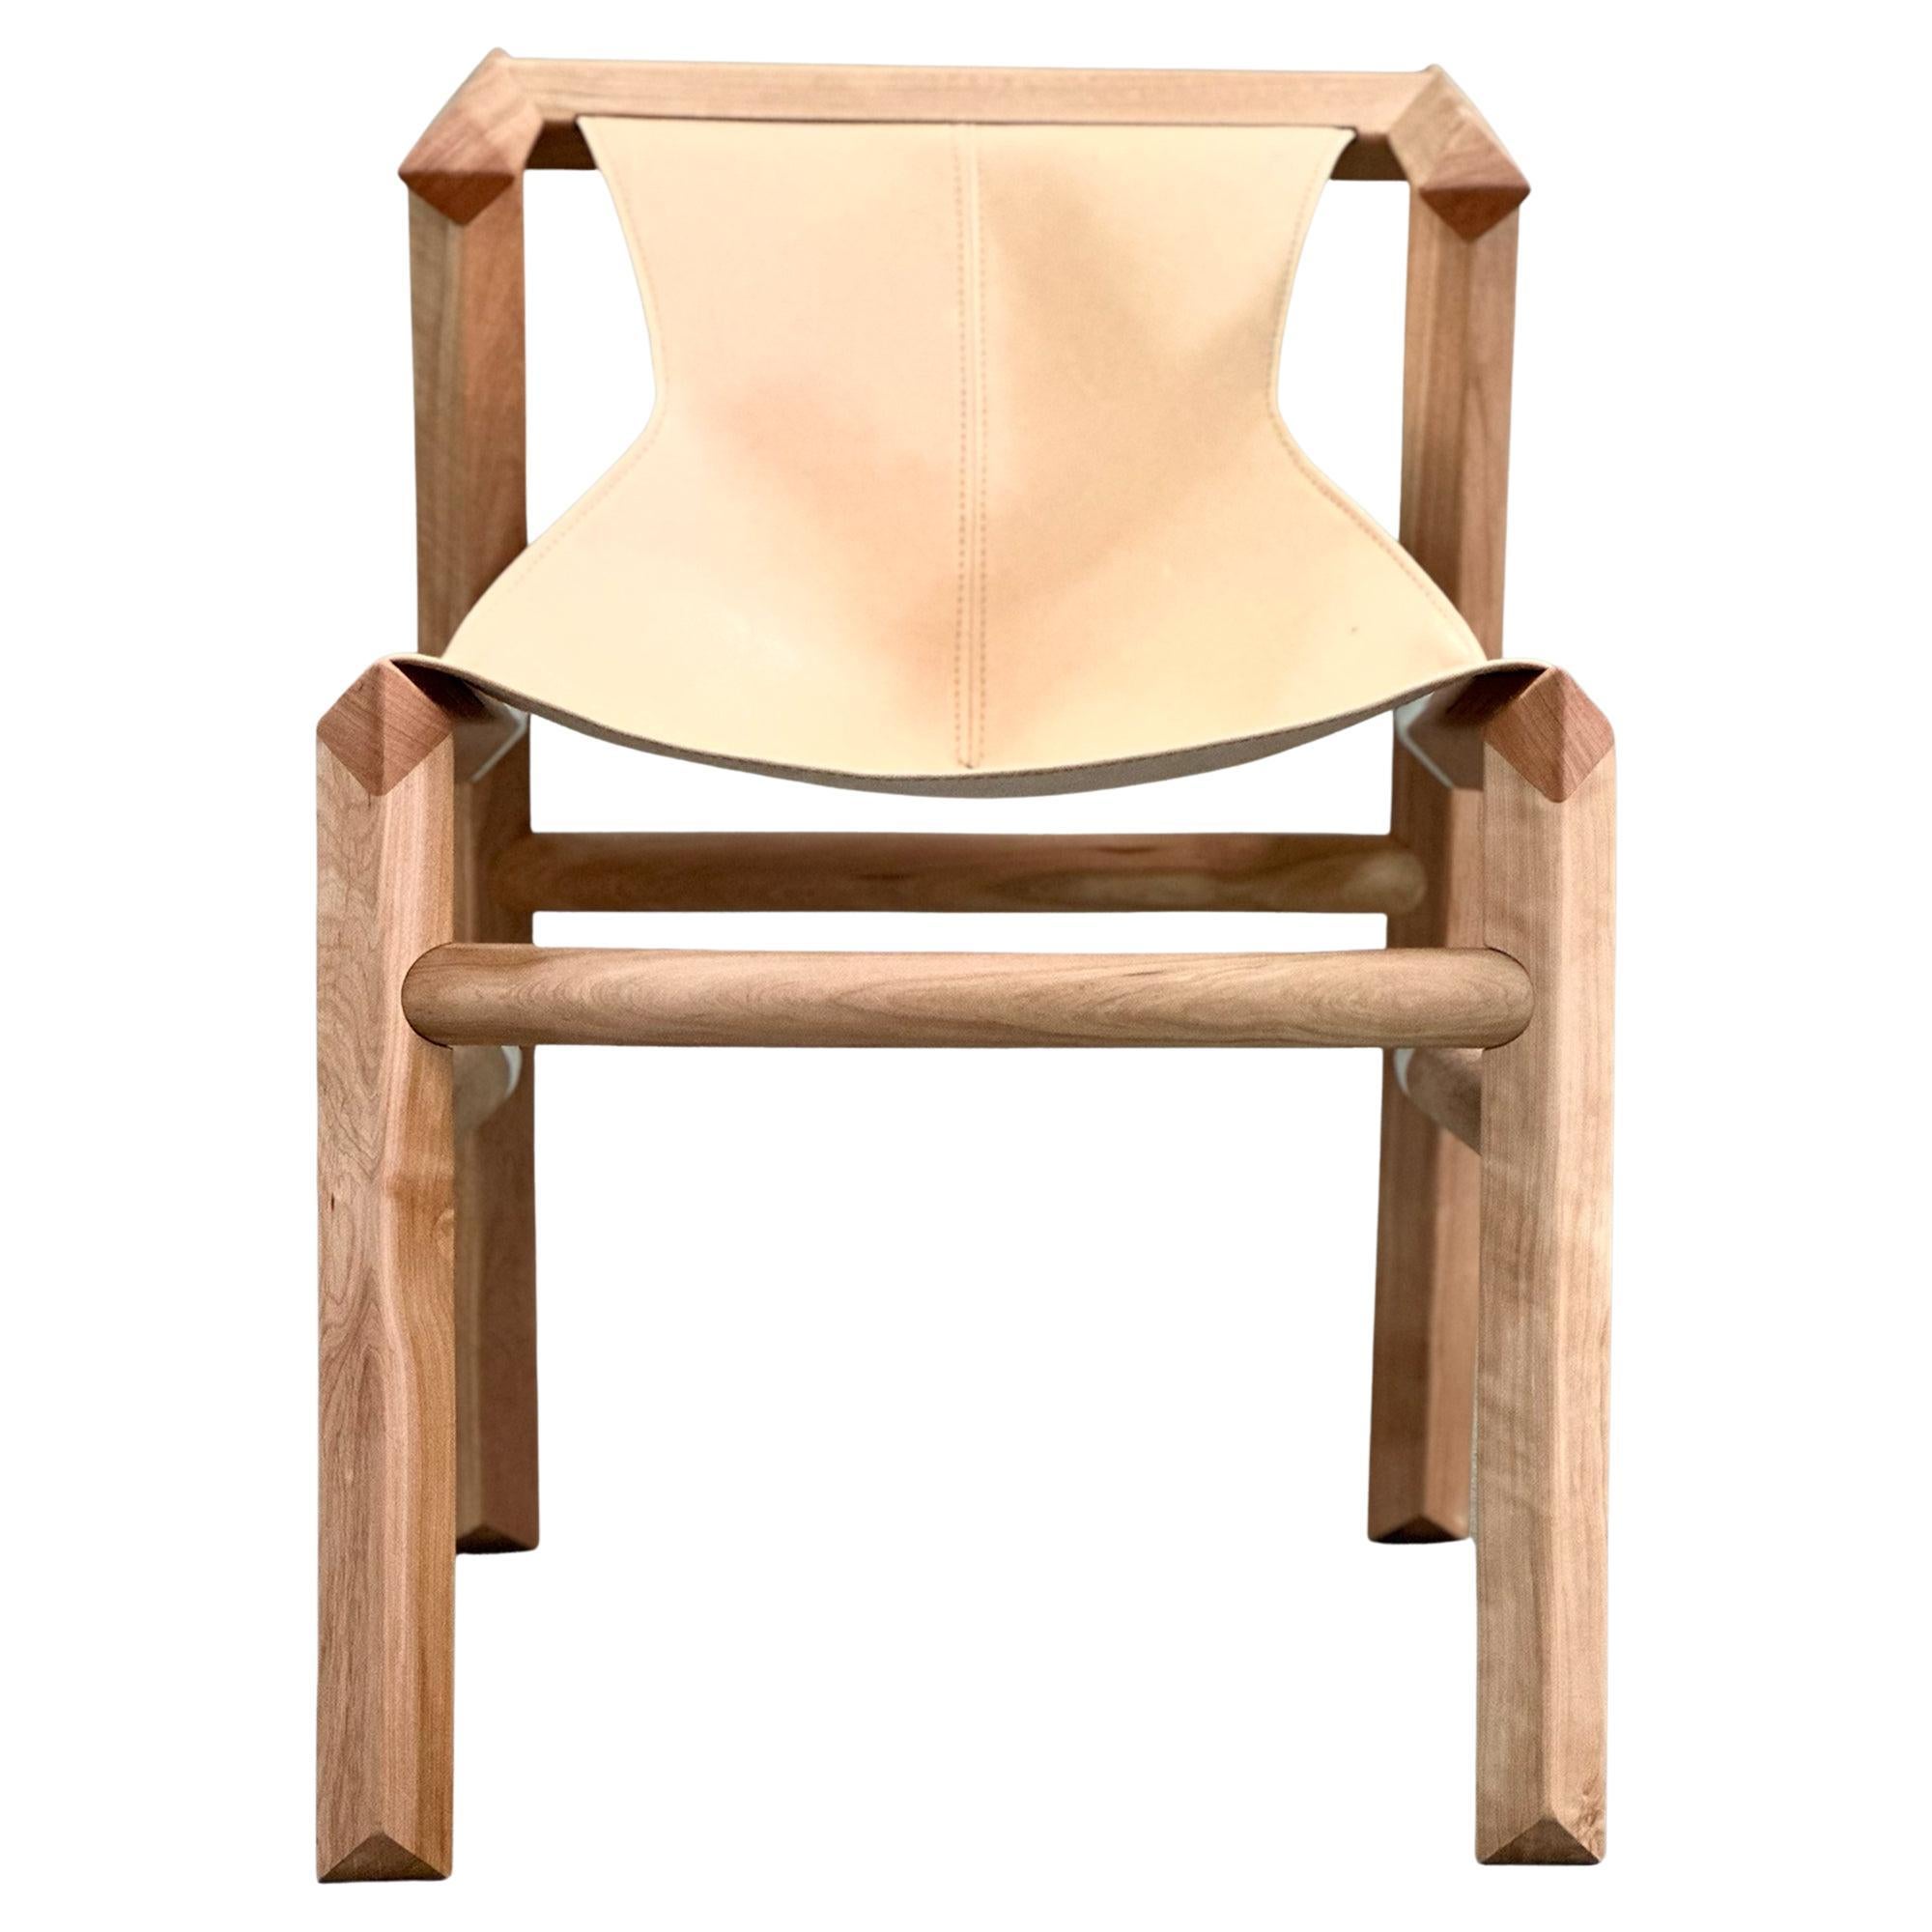 The chair design language and construction process is base in the slow made philosophy, combining traditional and modern techniques, 3D printed joints, digital fabrication and handmade process.
Each chair is made by his creator and his team at the